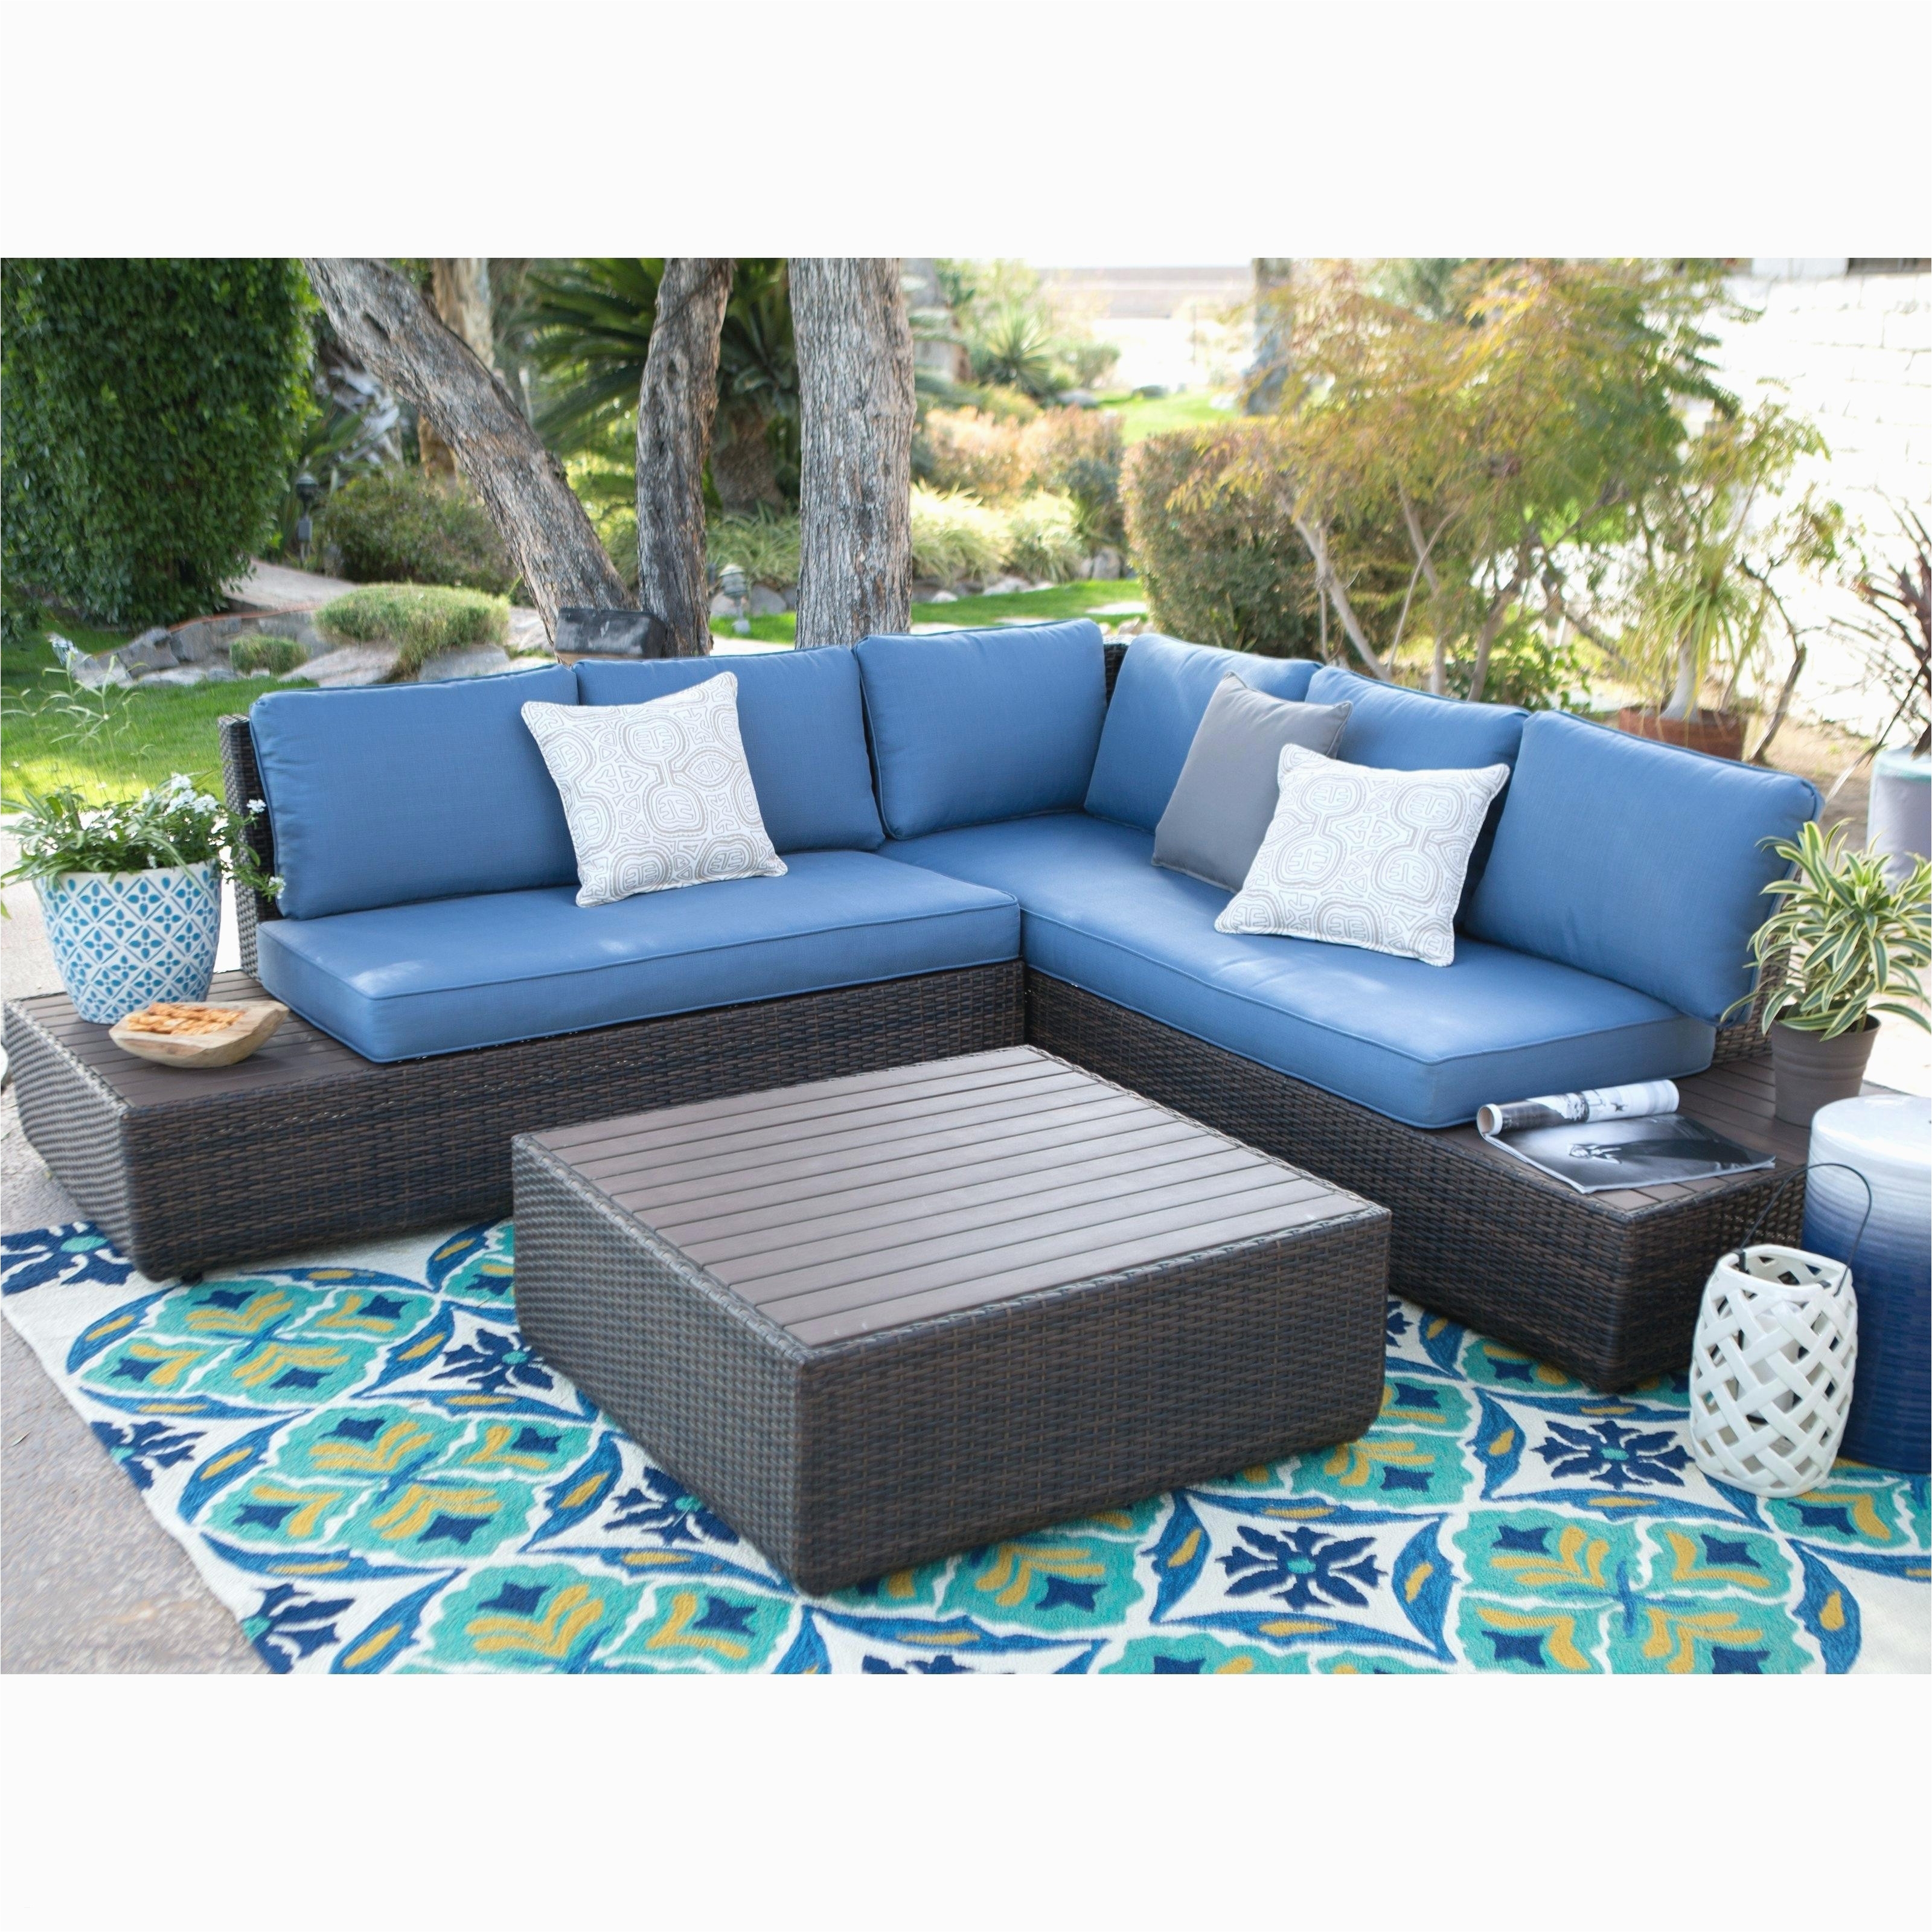 outdoor coffee tables wicker outdoor sofa 0d patio chairs sale